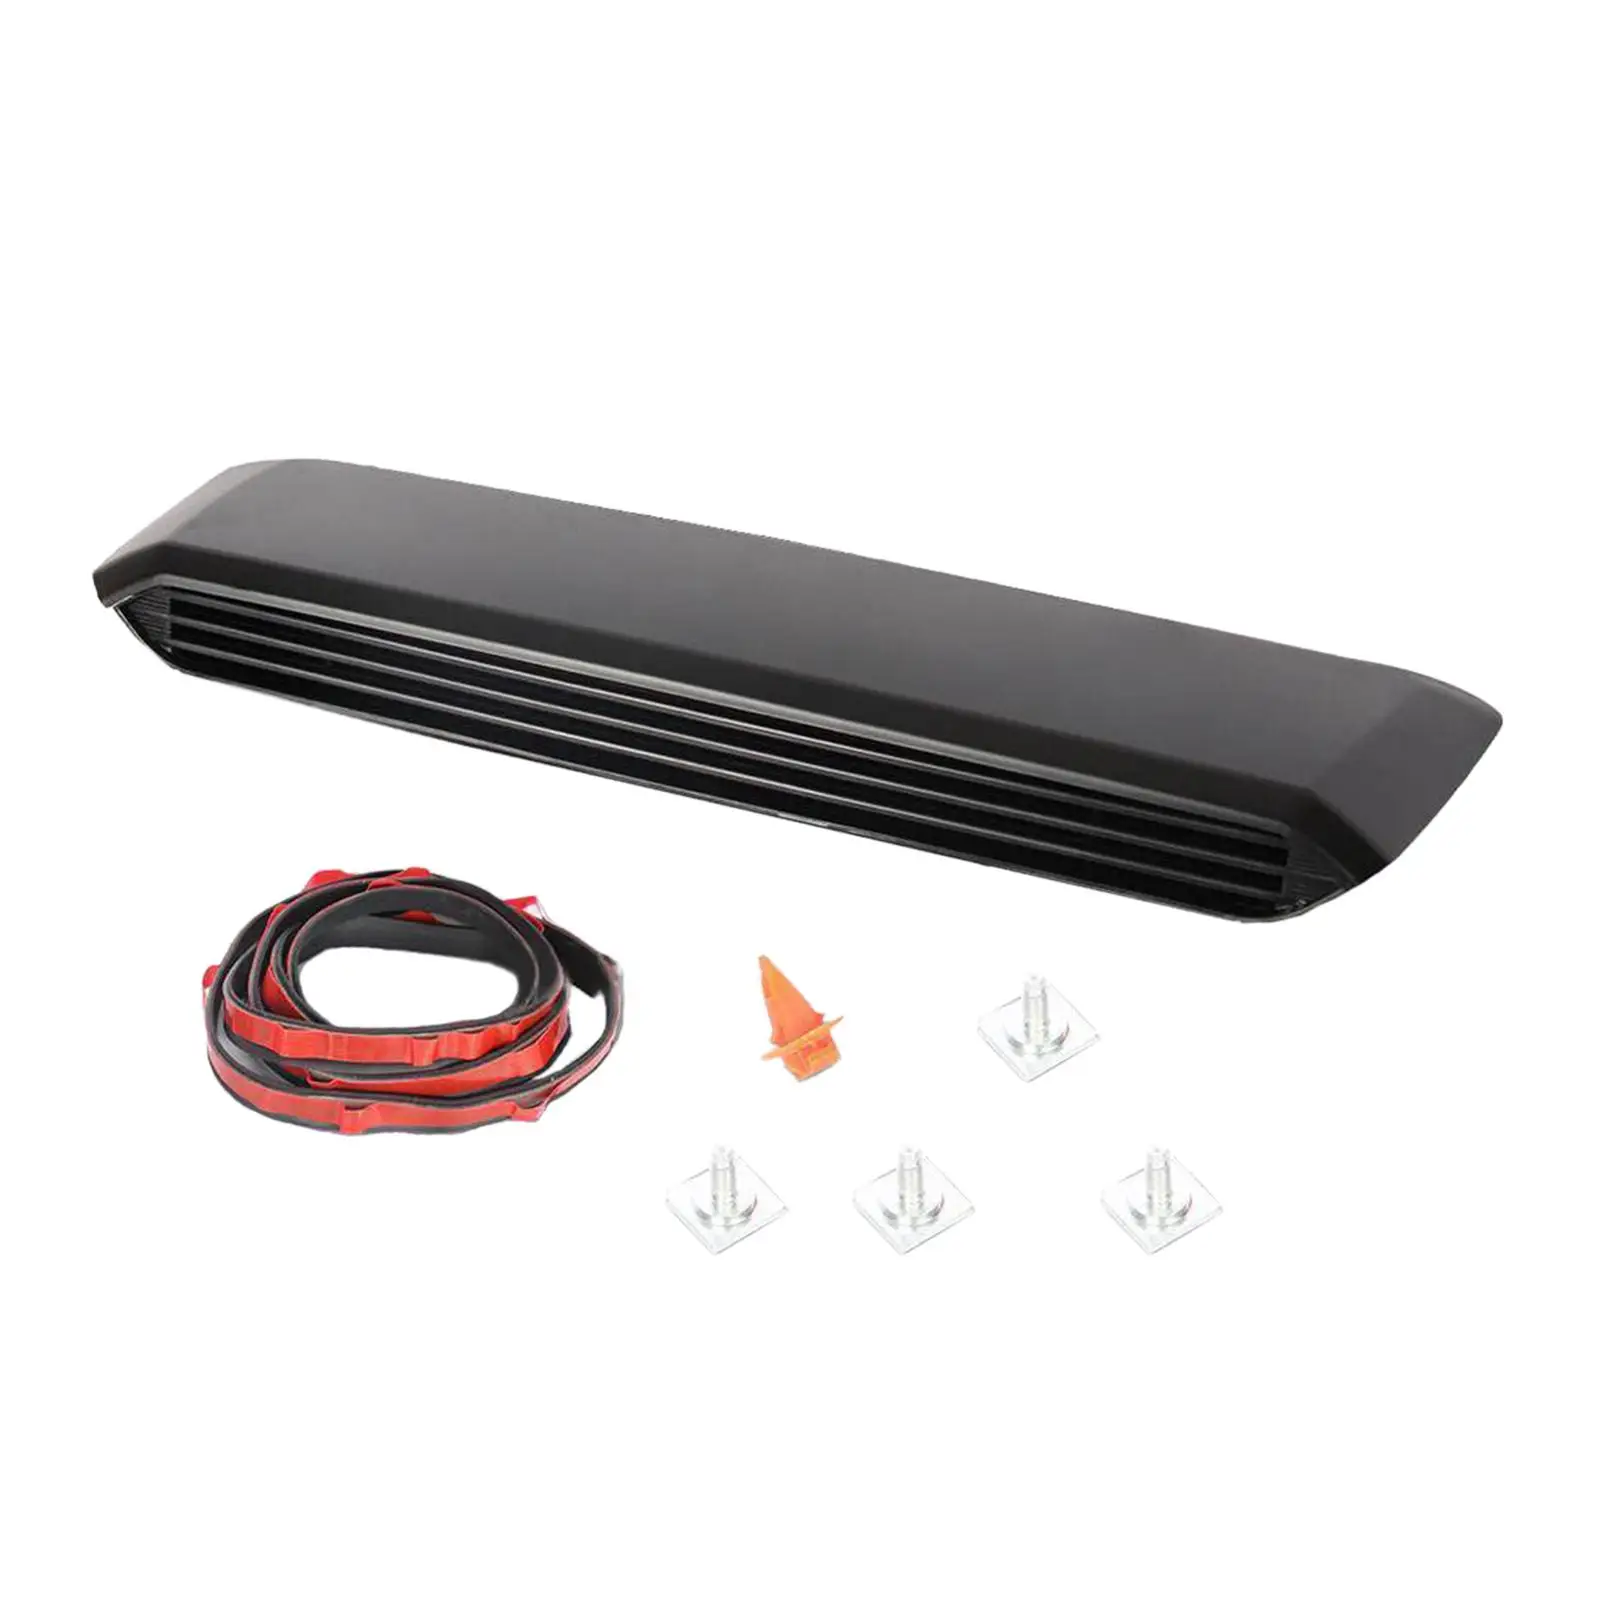 76181-04900, Hood Scoop Kit, Easy to Install, Spare Parts, Premium Car